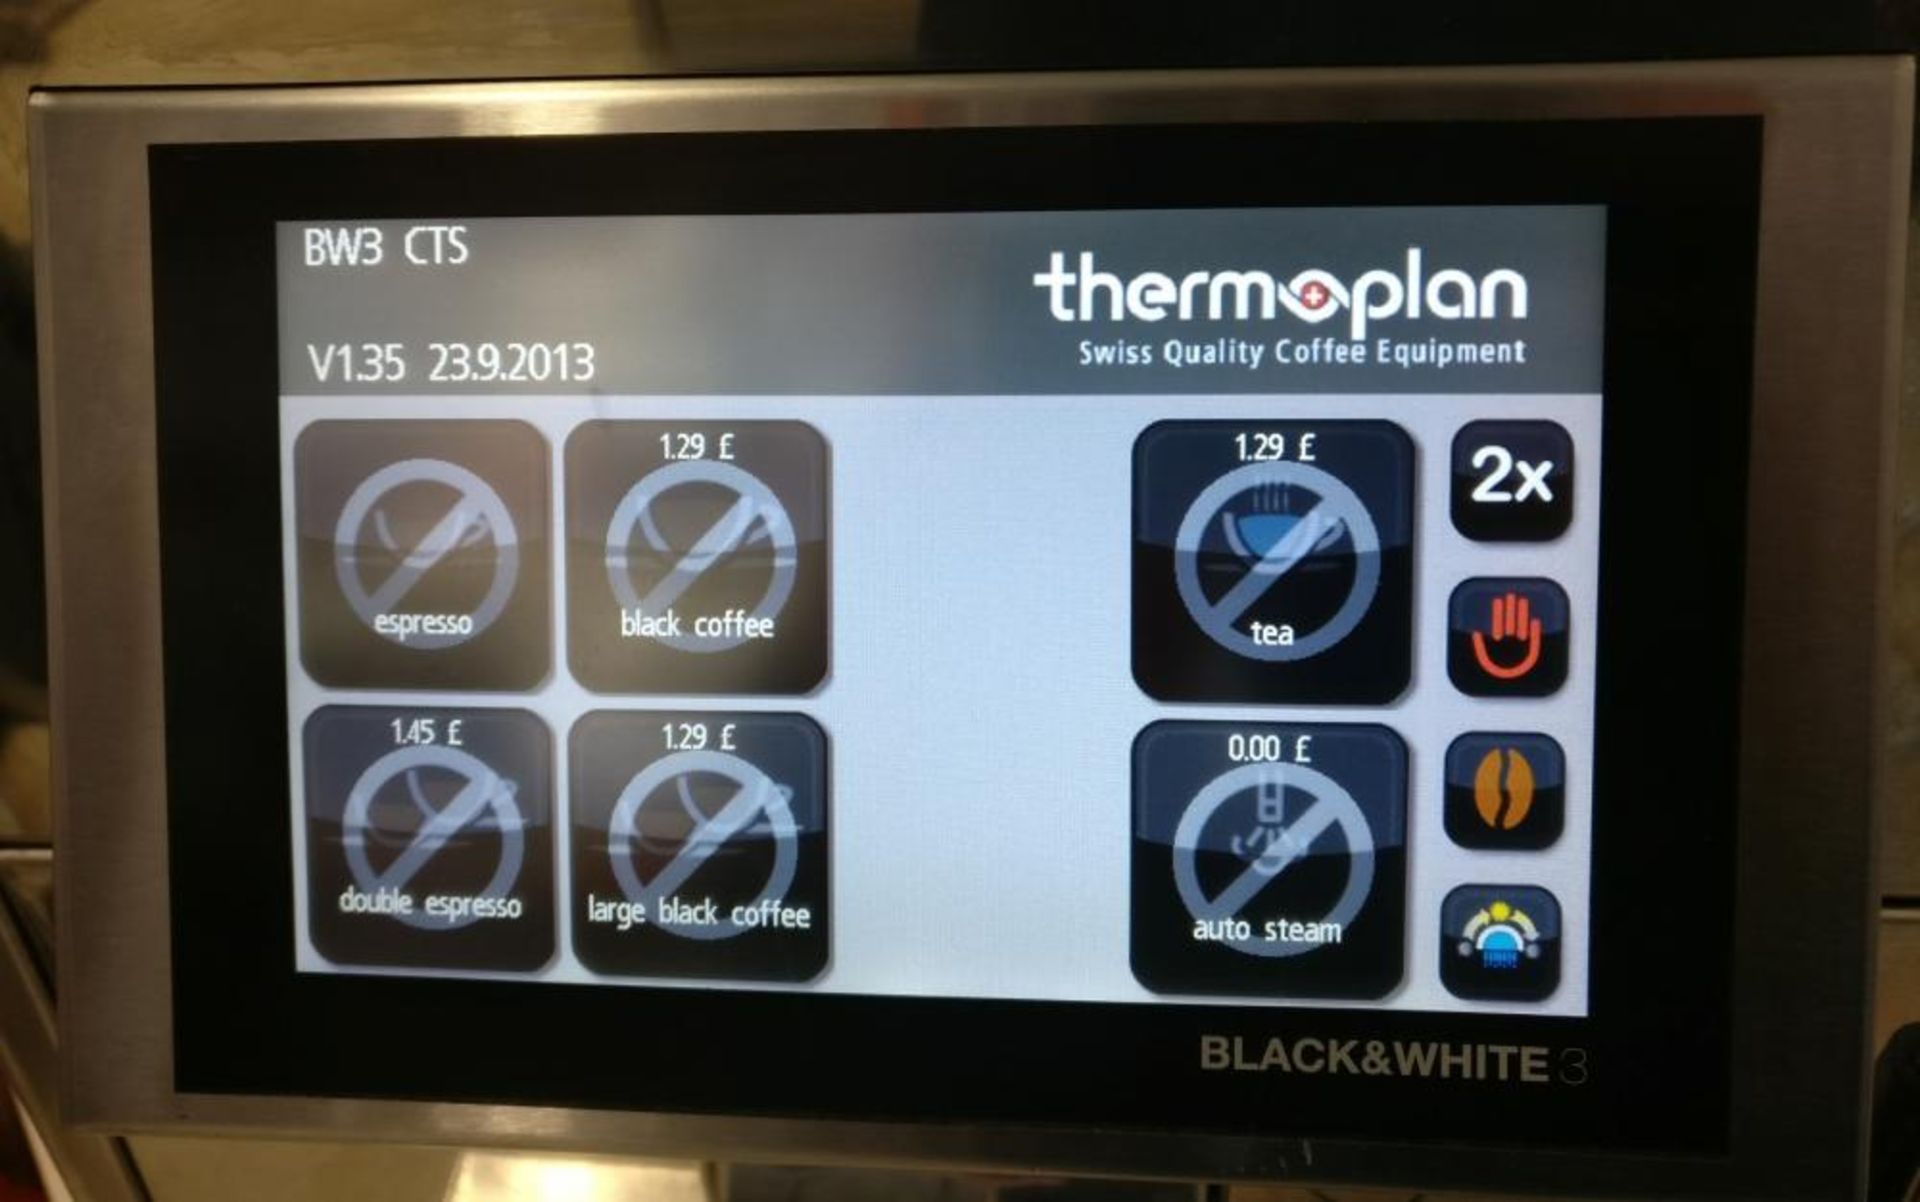 1 x Thermoplan Black & White 3 Fully Automatic Coffee Machine - 240 Espresso / 200 Coffee Capacity - Image 3 of 11